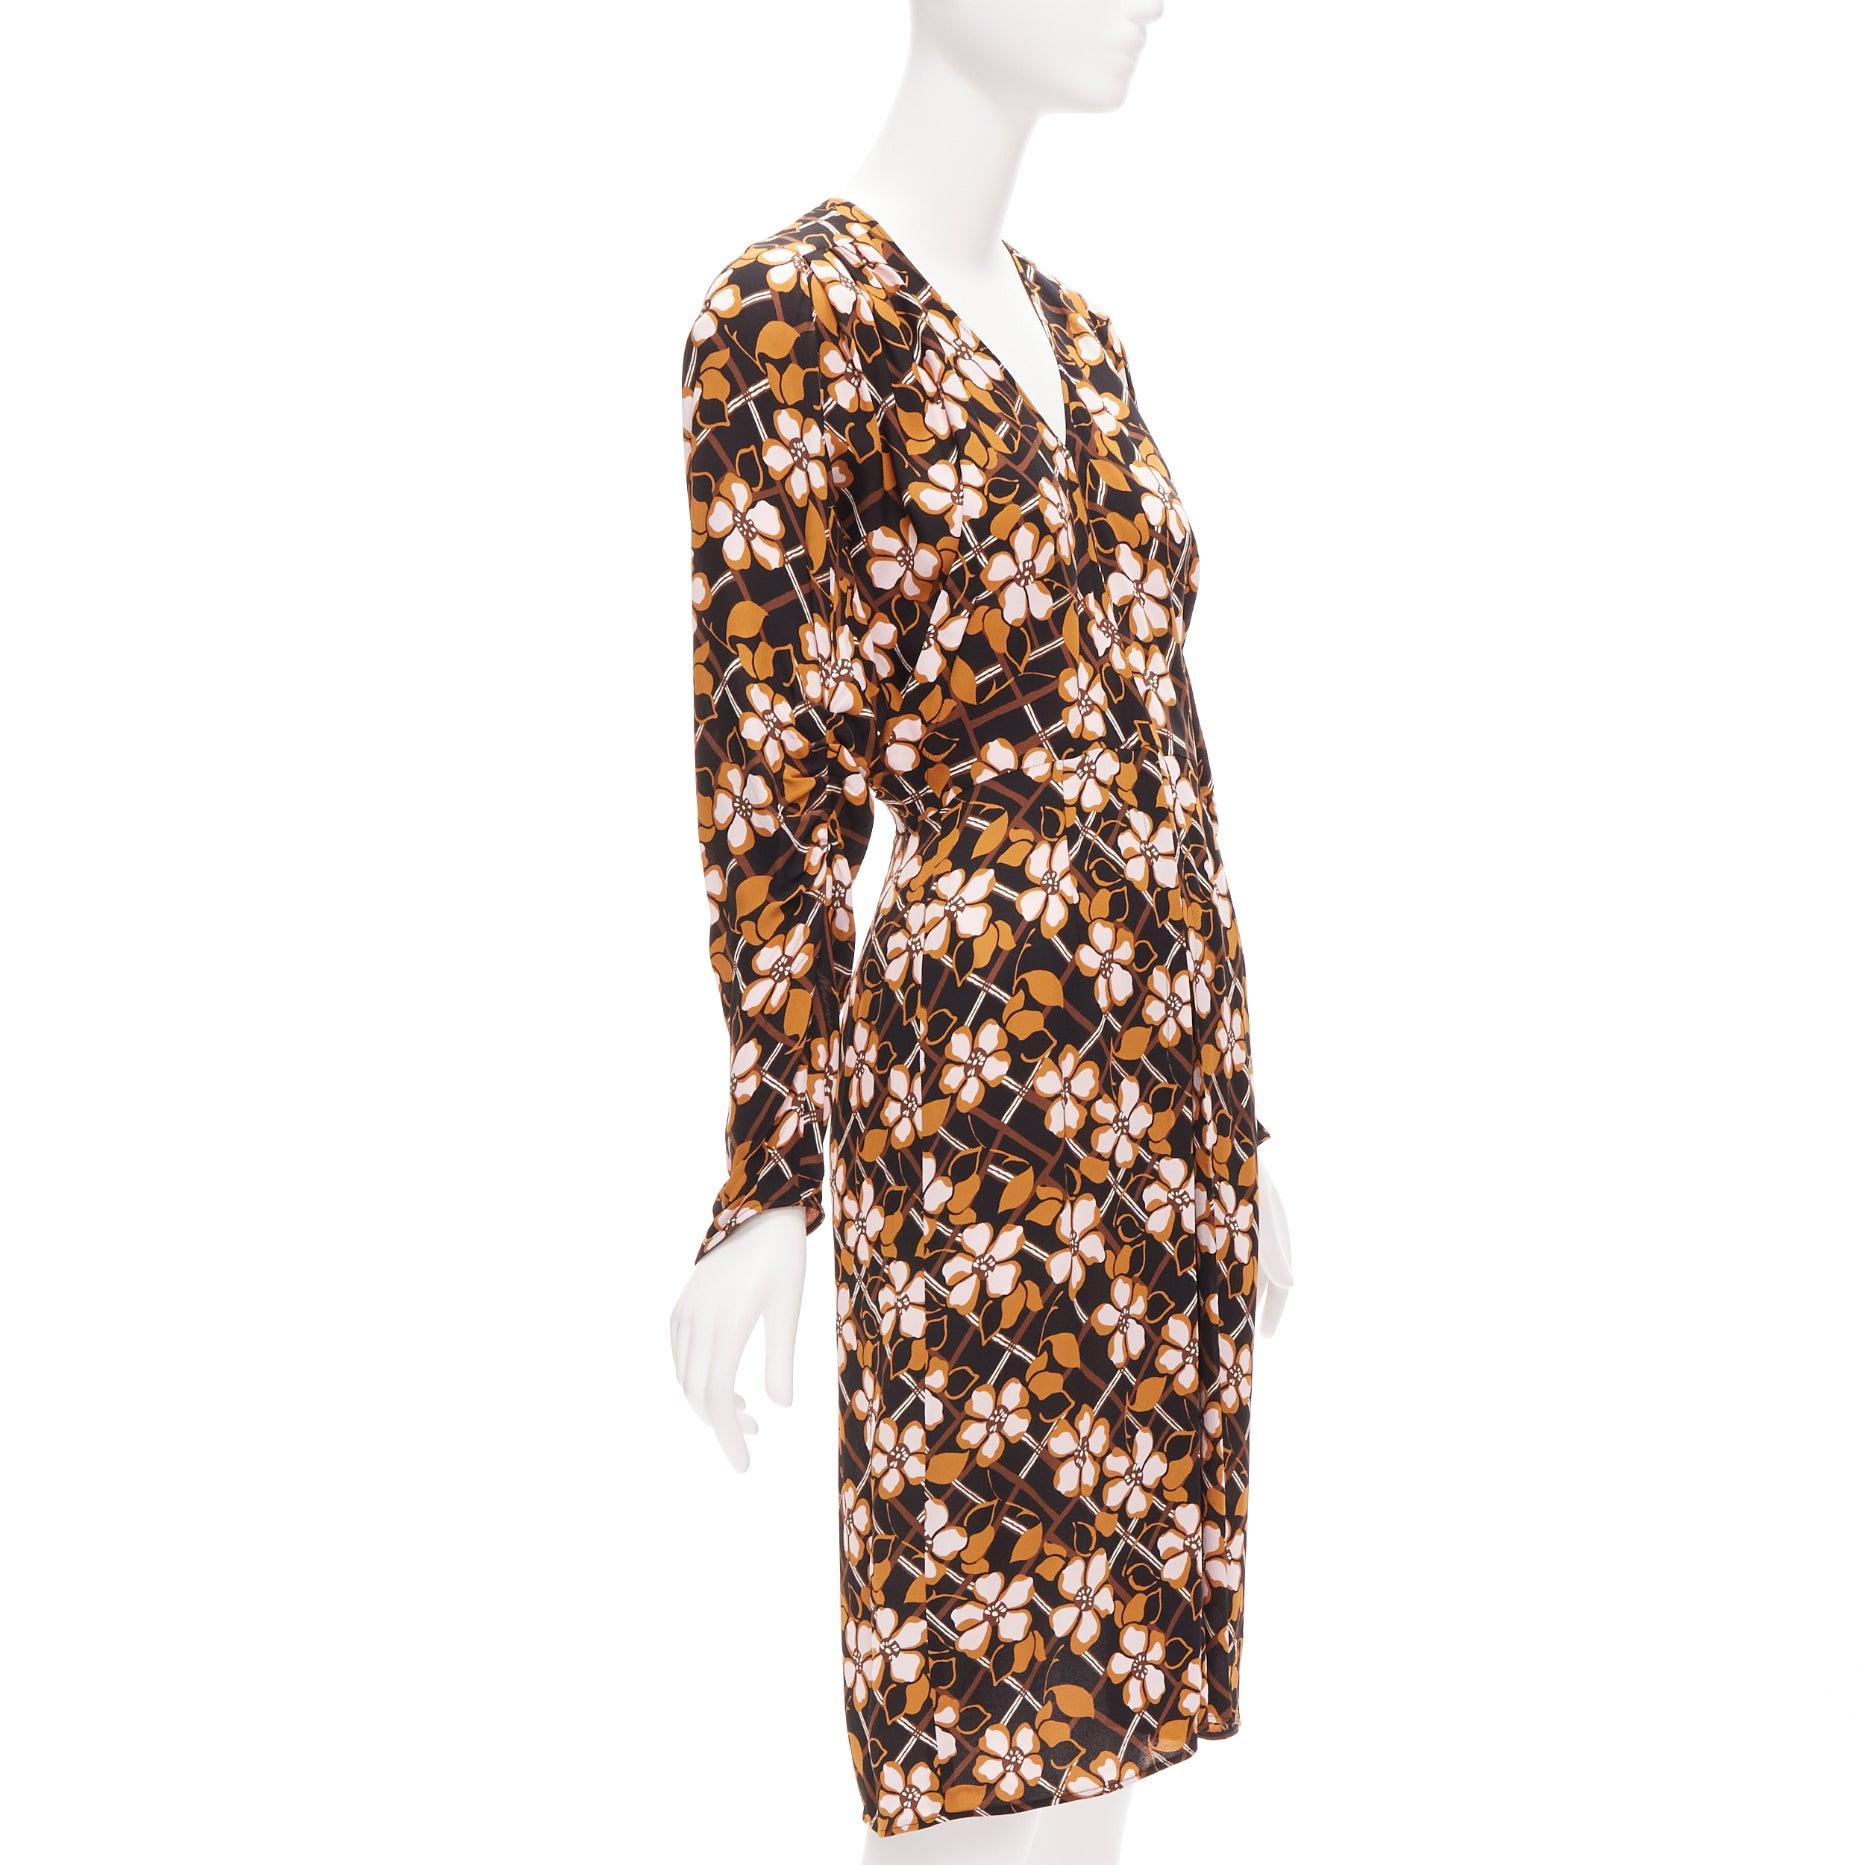 MARNI pink brown geometric flower print panelled sleeves V neck dress IT38 XS
Reference: CELG/A00285
Brand: Marni
Material: Viscose
Color: Pink, Brown
Pattern: Floral
Closure: Zip
Extra Details: Back zip.
Made in: Italy

CONDITION:
Condition: Very